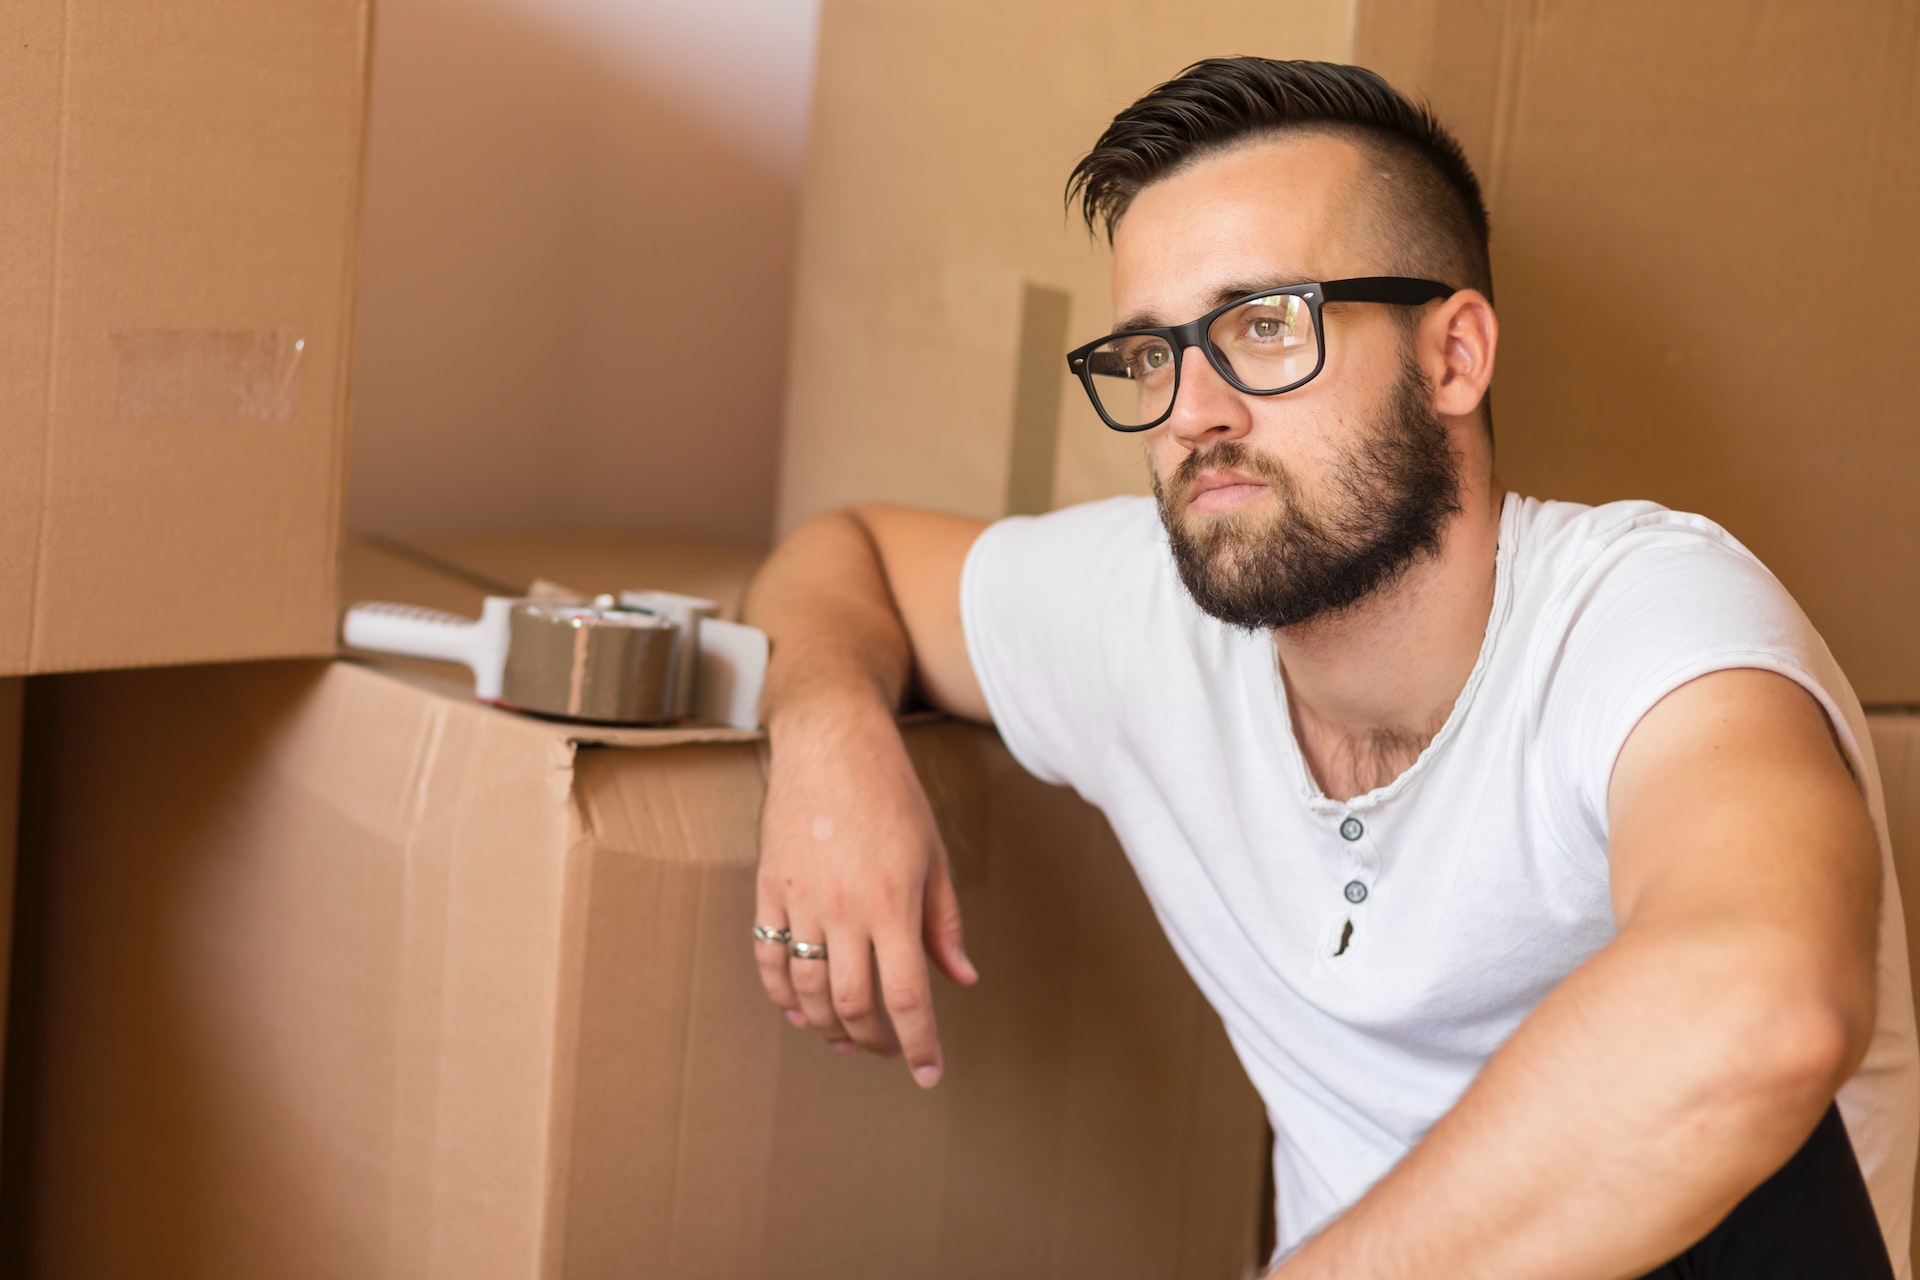 Where to Hire Moving Help